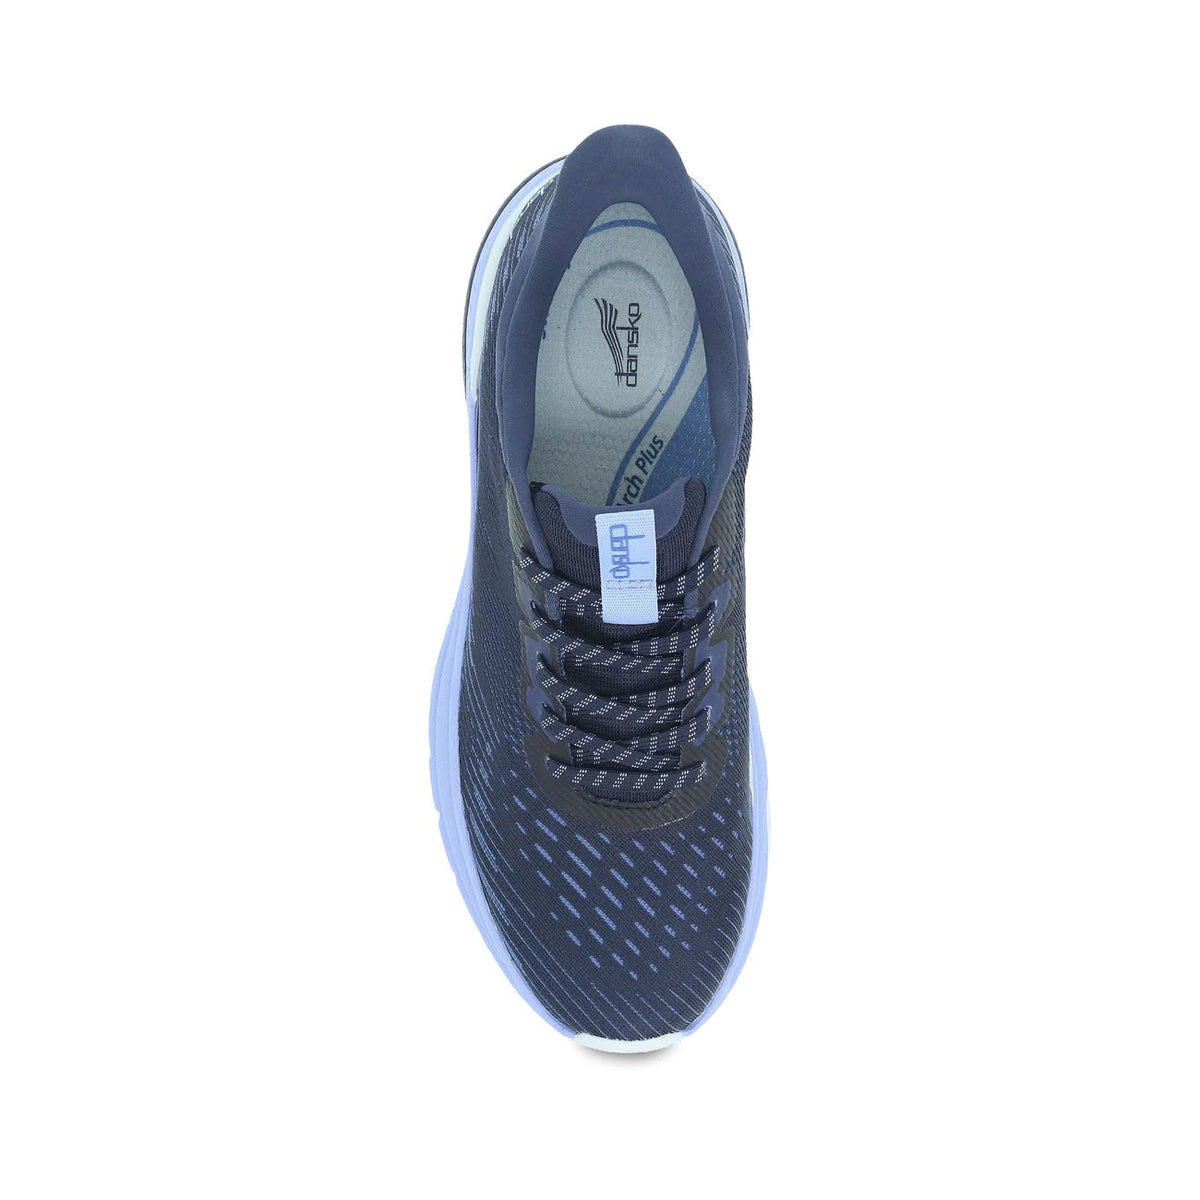 A single Dansko Peony Navy - Womens walking sneaker with arch support and a white sole, viewed from the front, displayed against a white background.